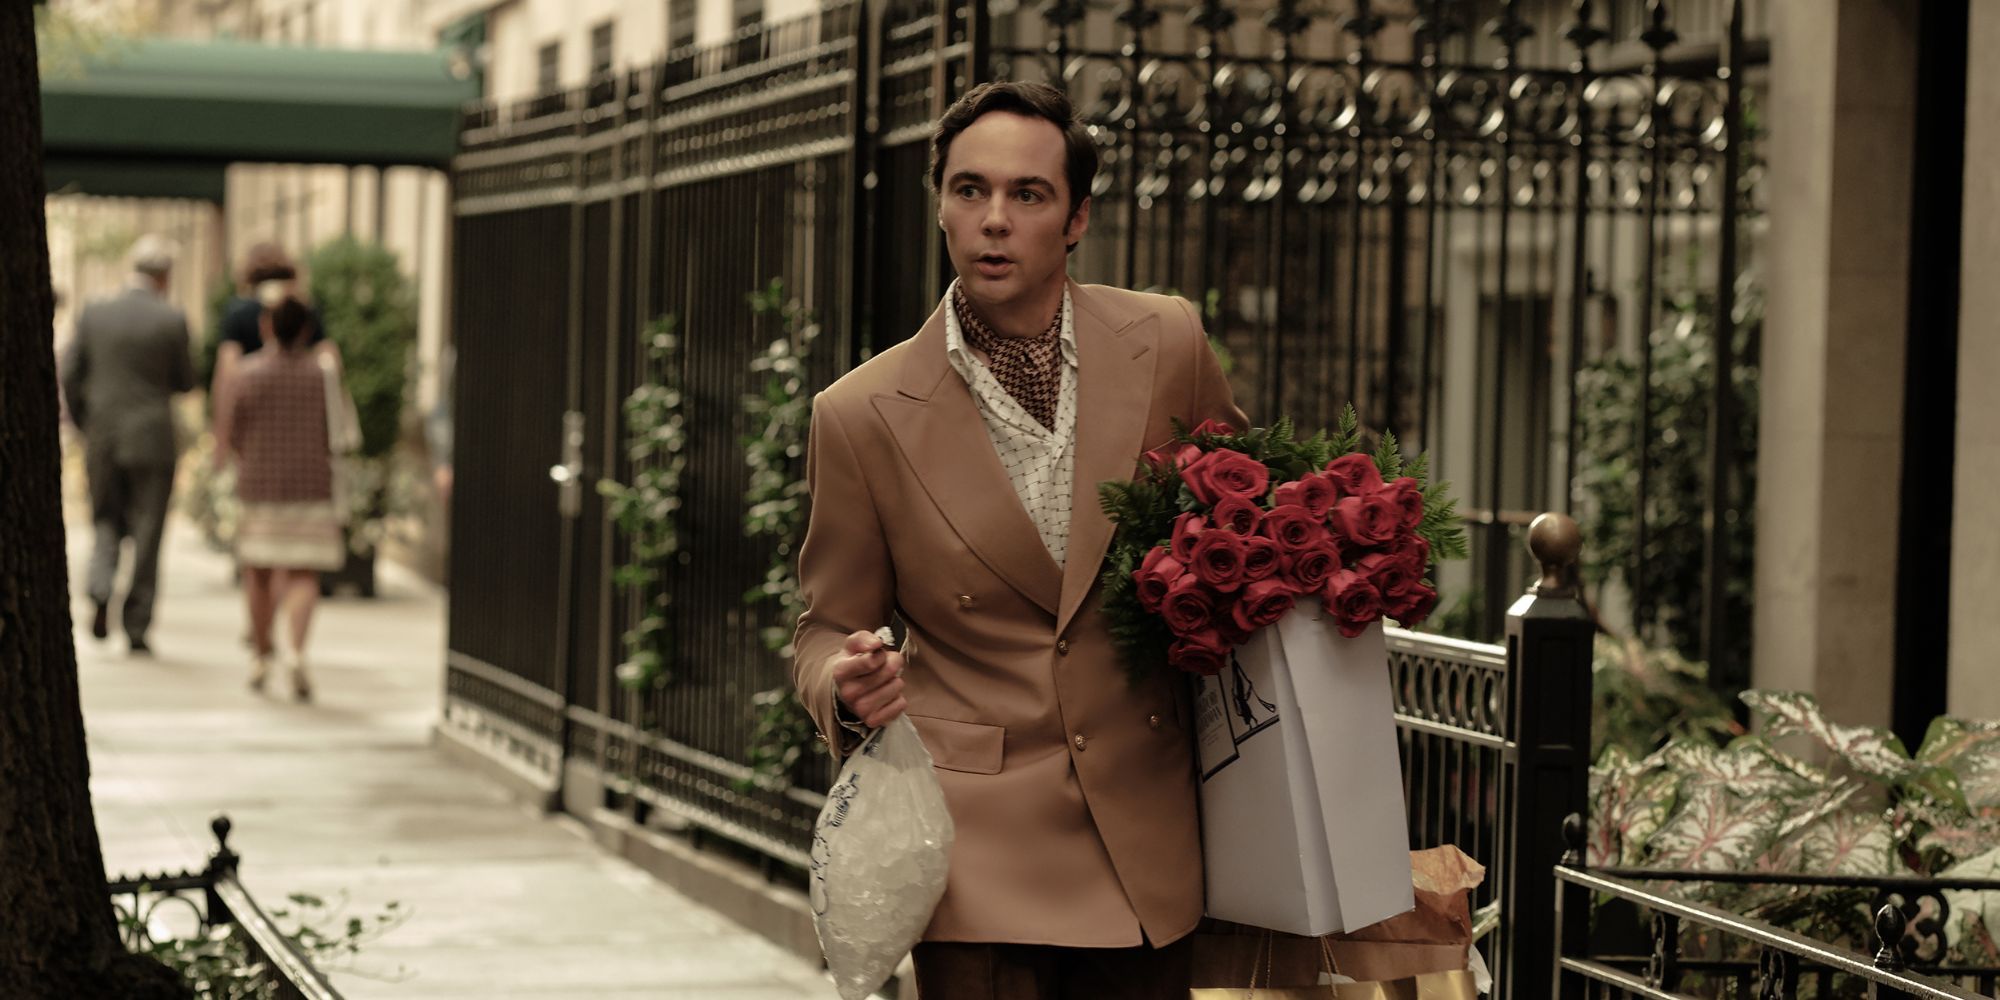 A man in suit carrying a bouquet of roses and a bag of ice, walking down the street